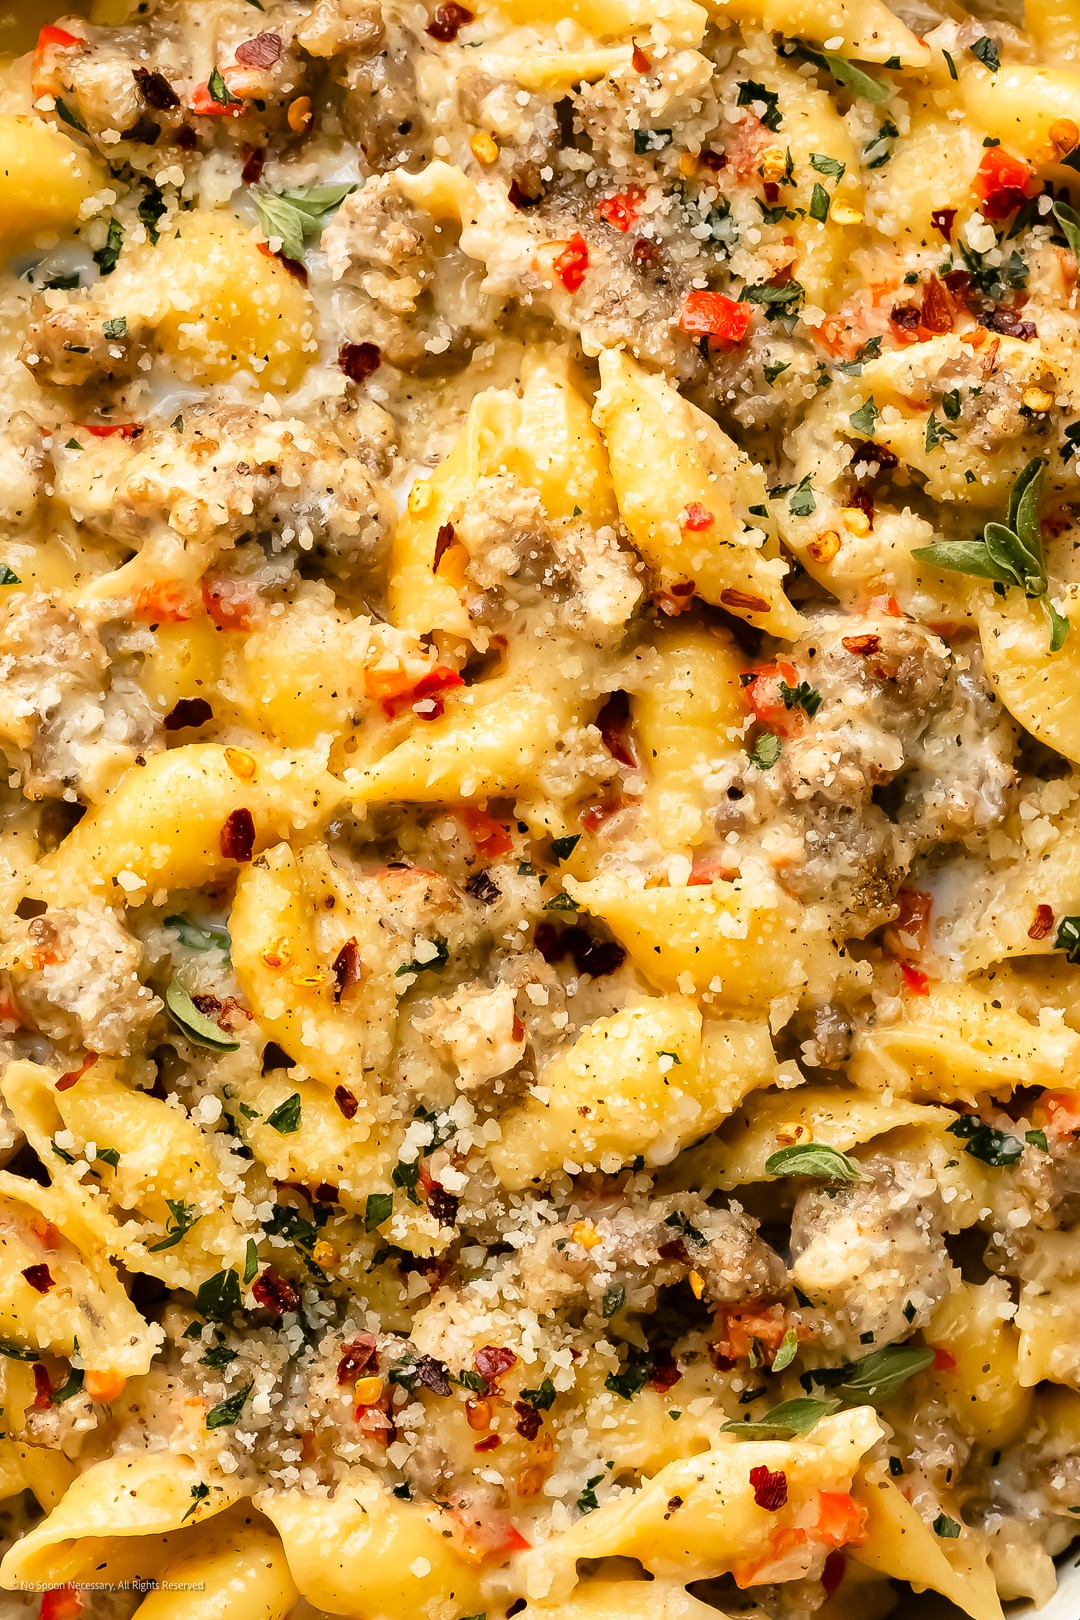 Close-up photo illustrating the rich and creamy texture of sausage pasta cream.